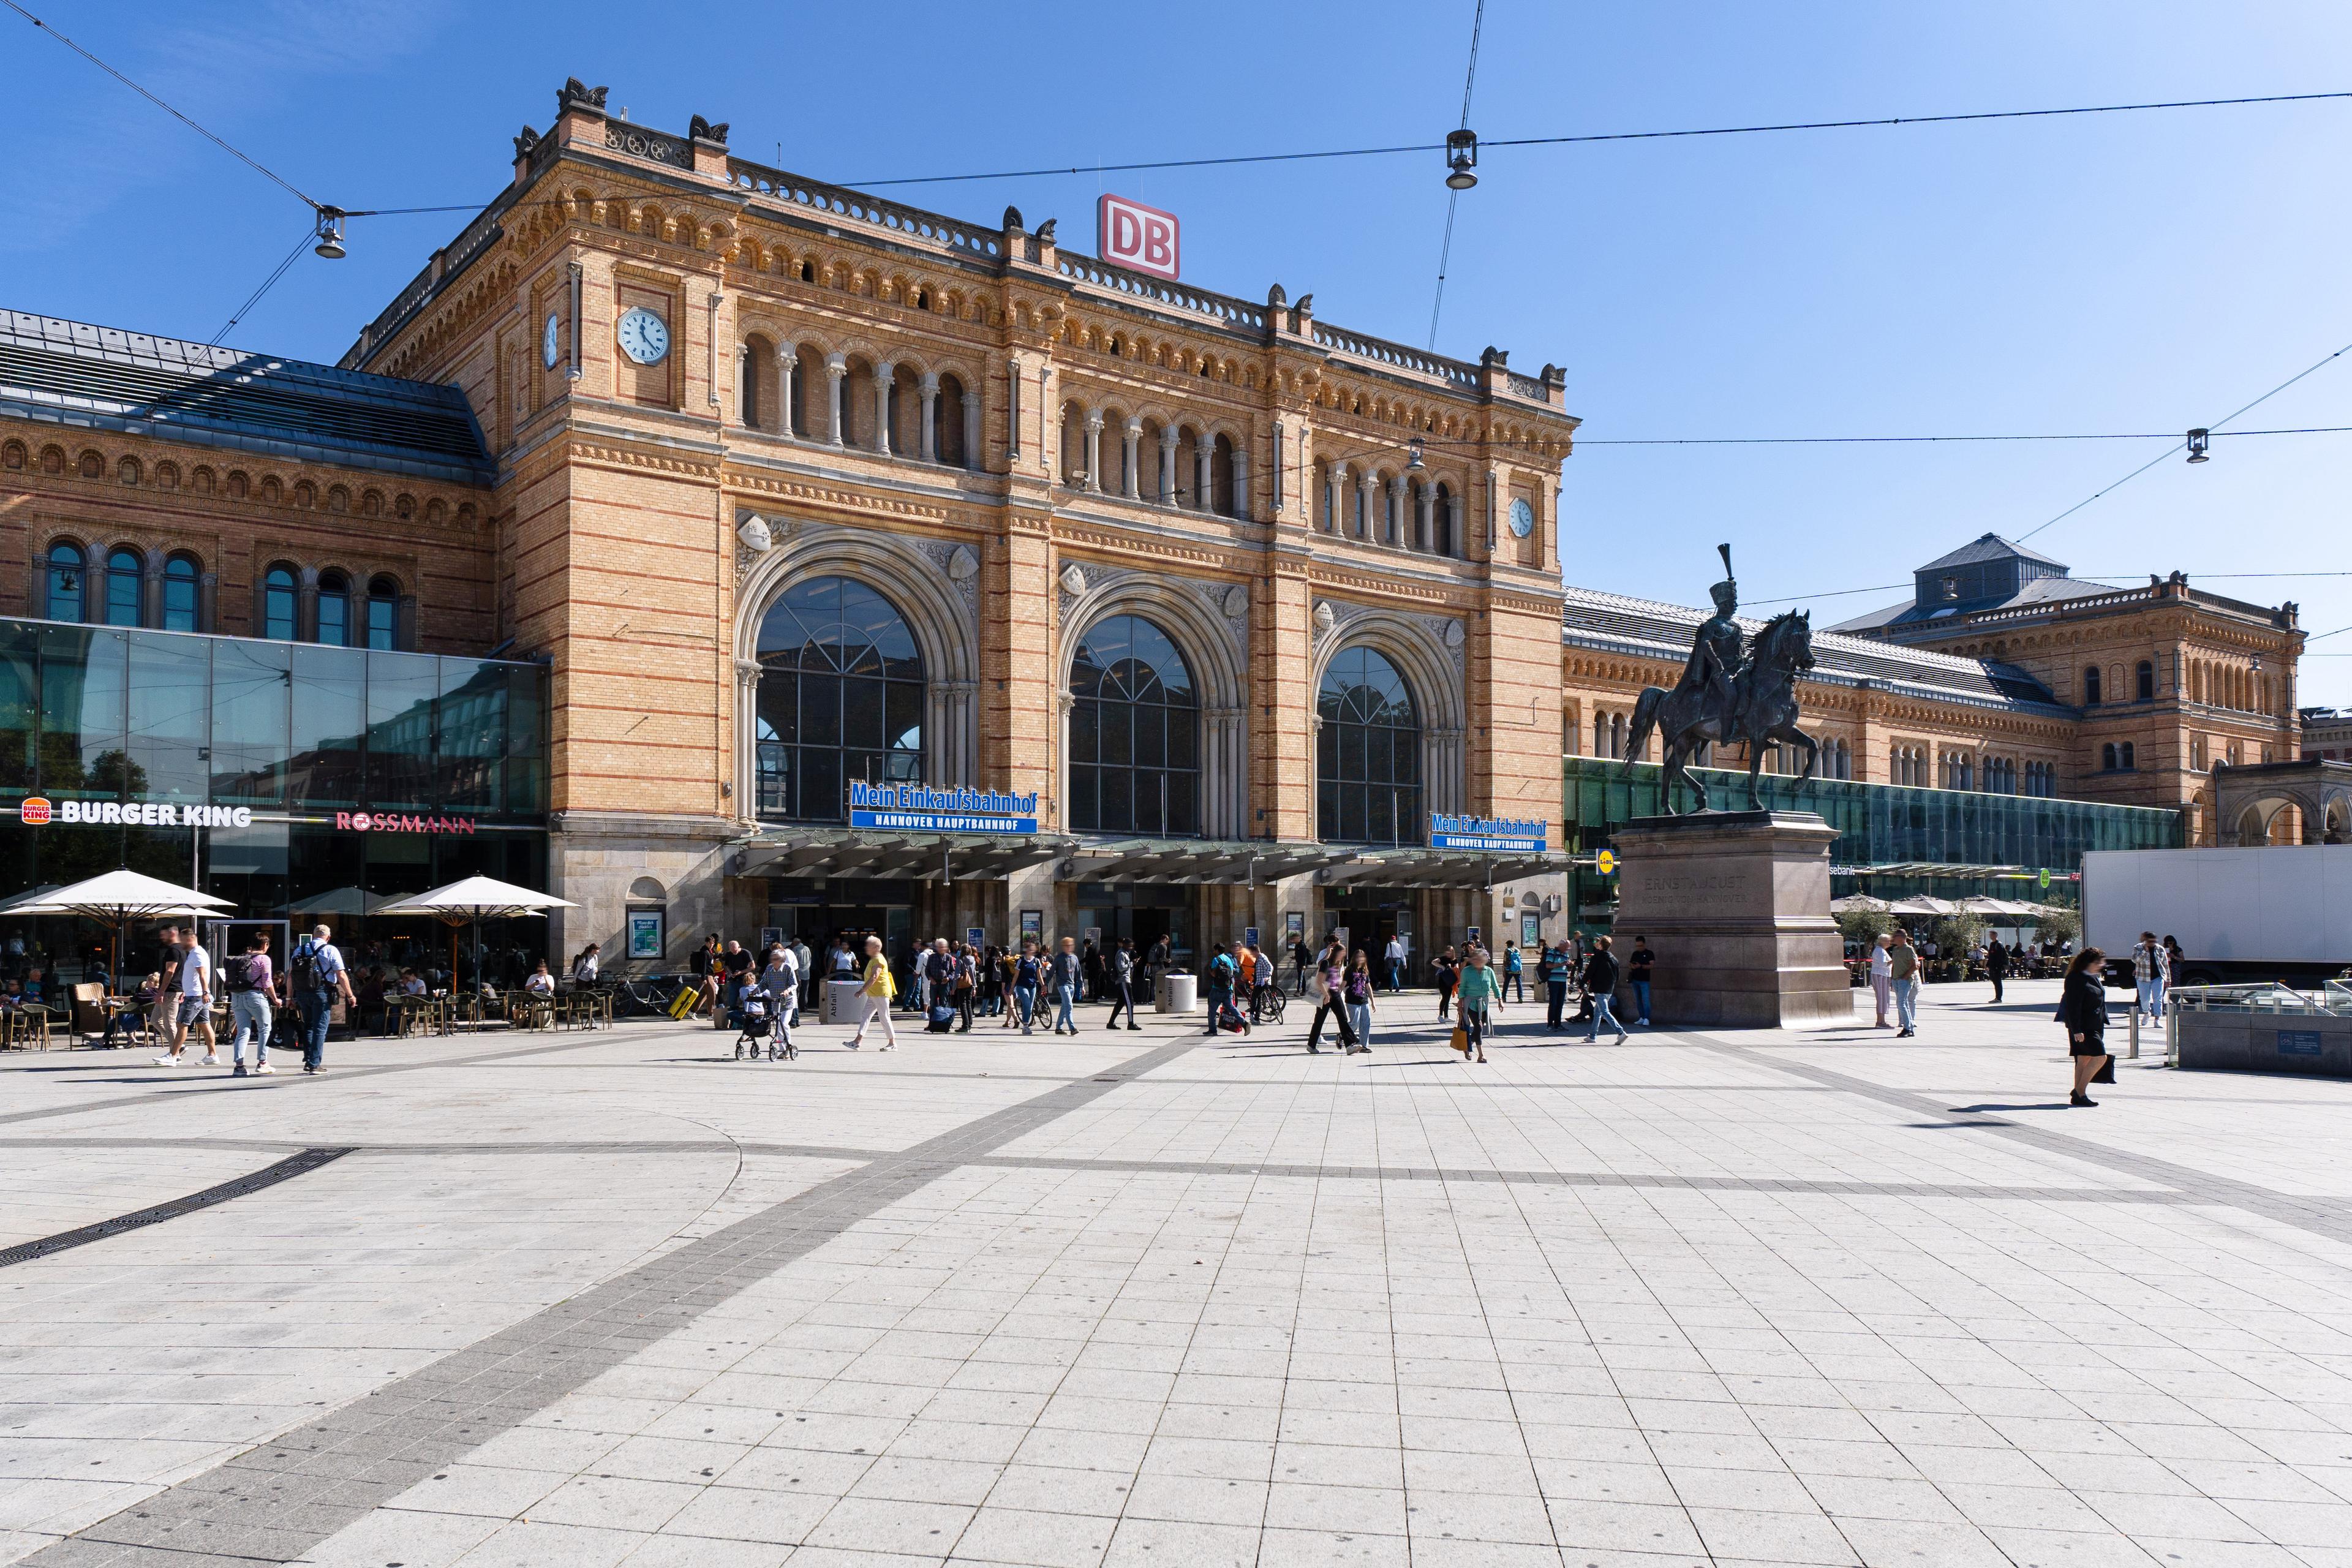 The station building of Hannover Hauptbahnhof with people in the foreground. 